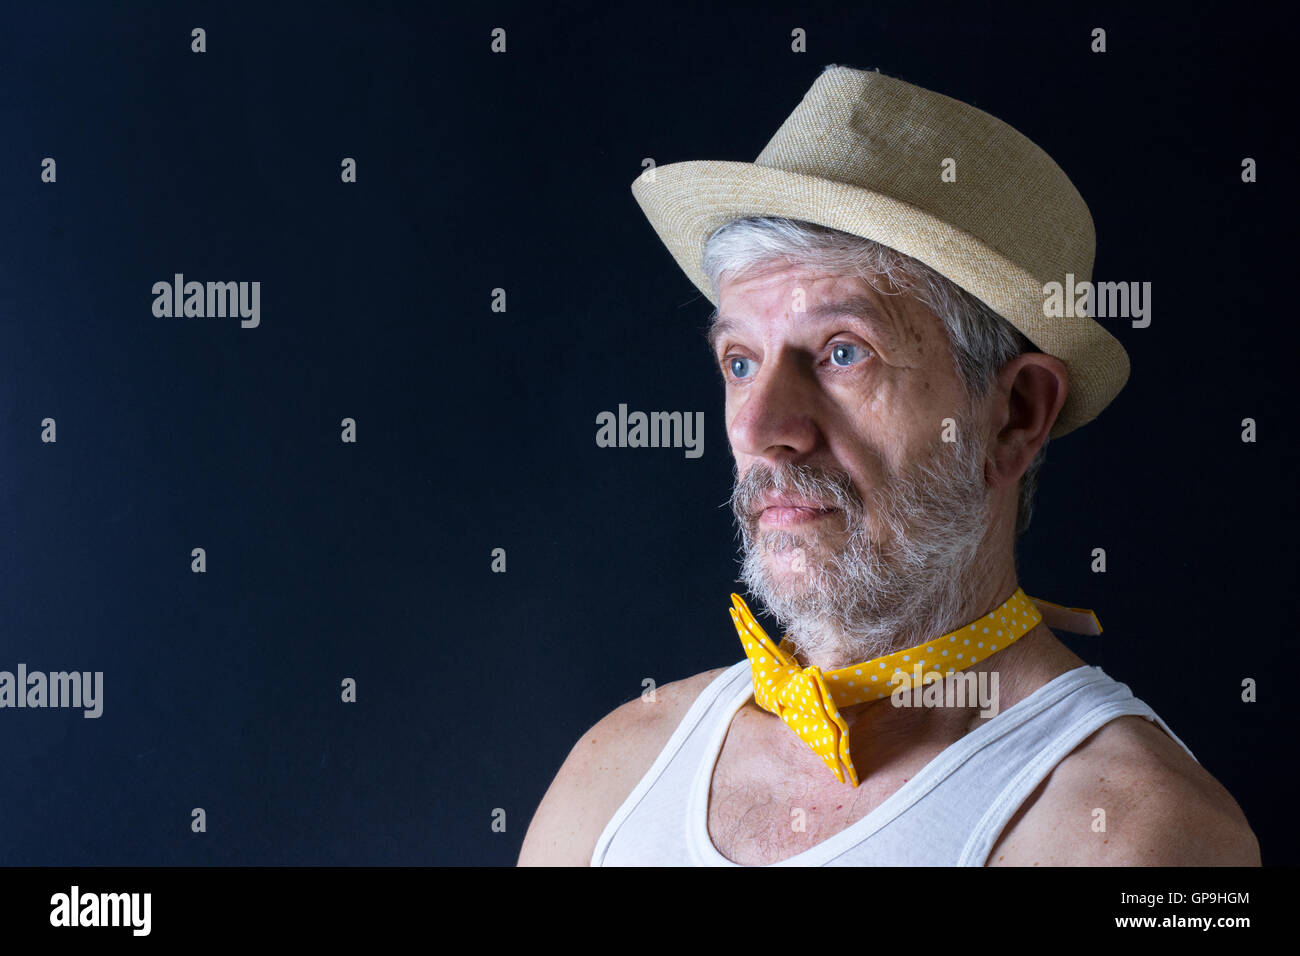 Crazy senior man with a hat and bow tie arround his neck Stock Photo